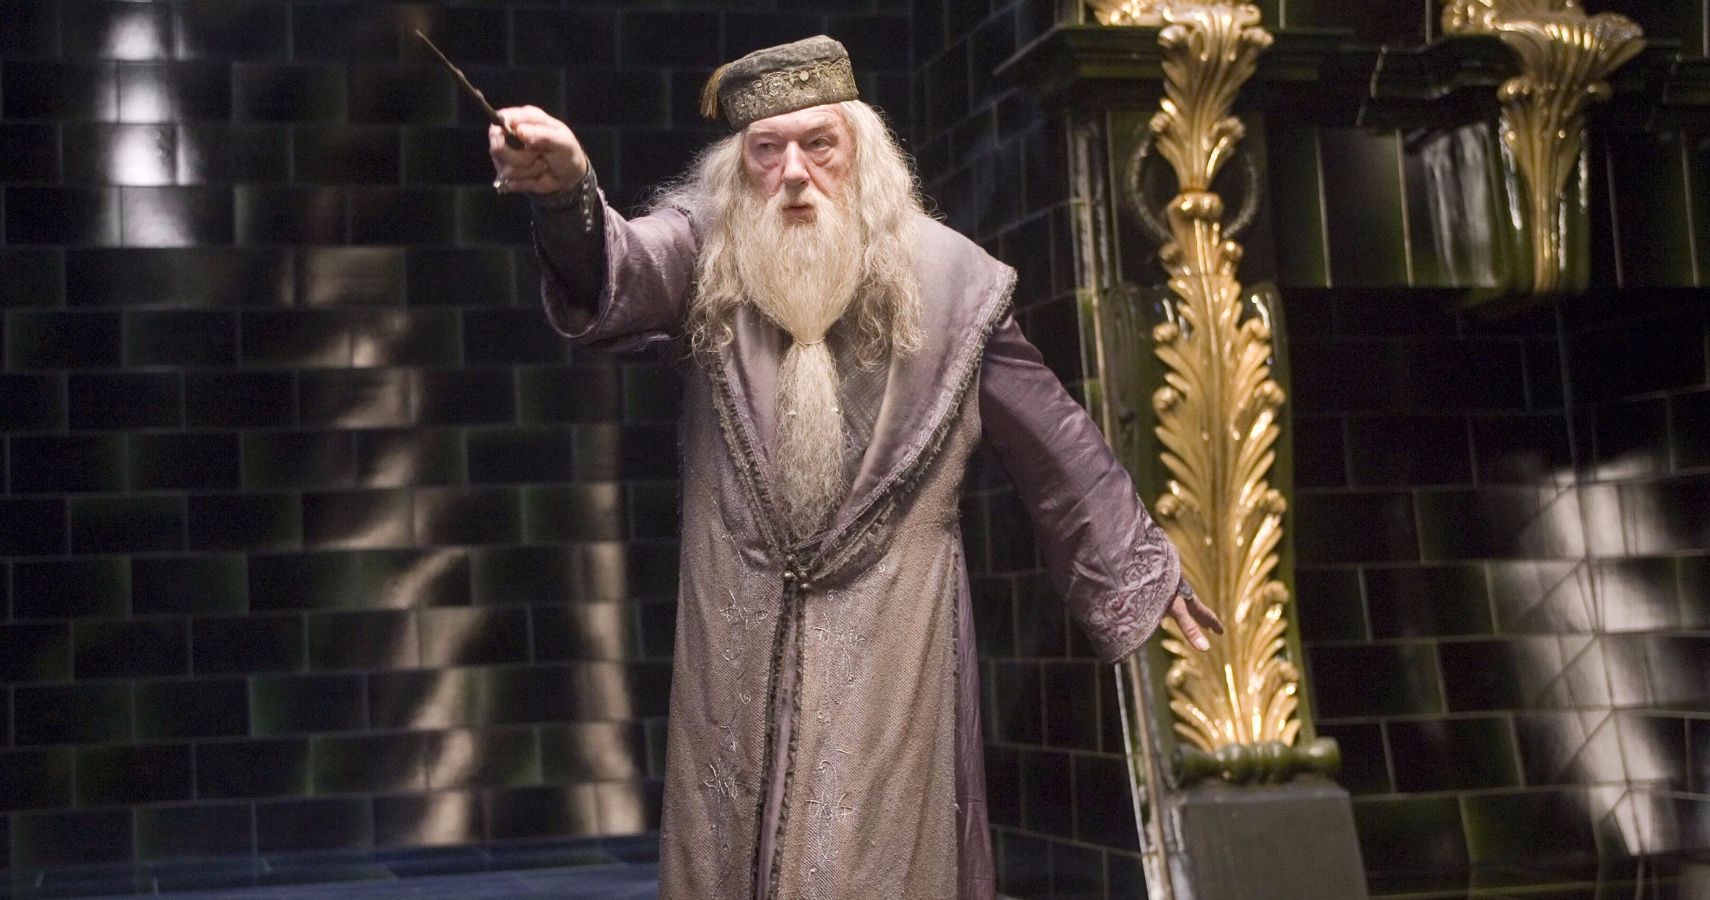 Harry Potter 5 Times Dumbledore Actually Helped Harry Defeat Voldemort (& 5 He Accidentally Hindered Him)